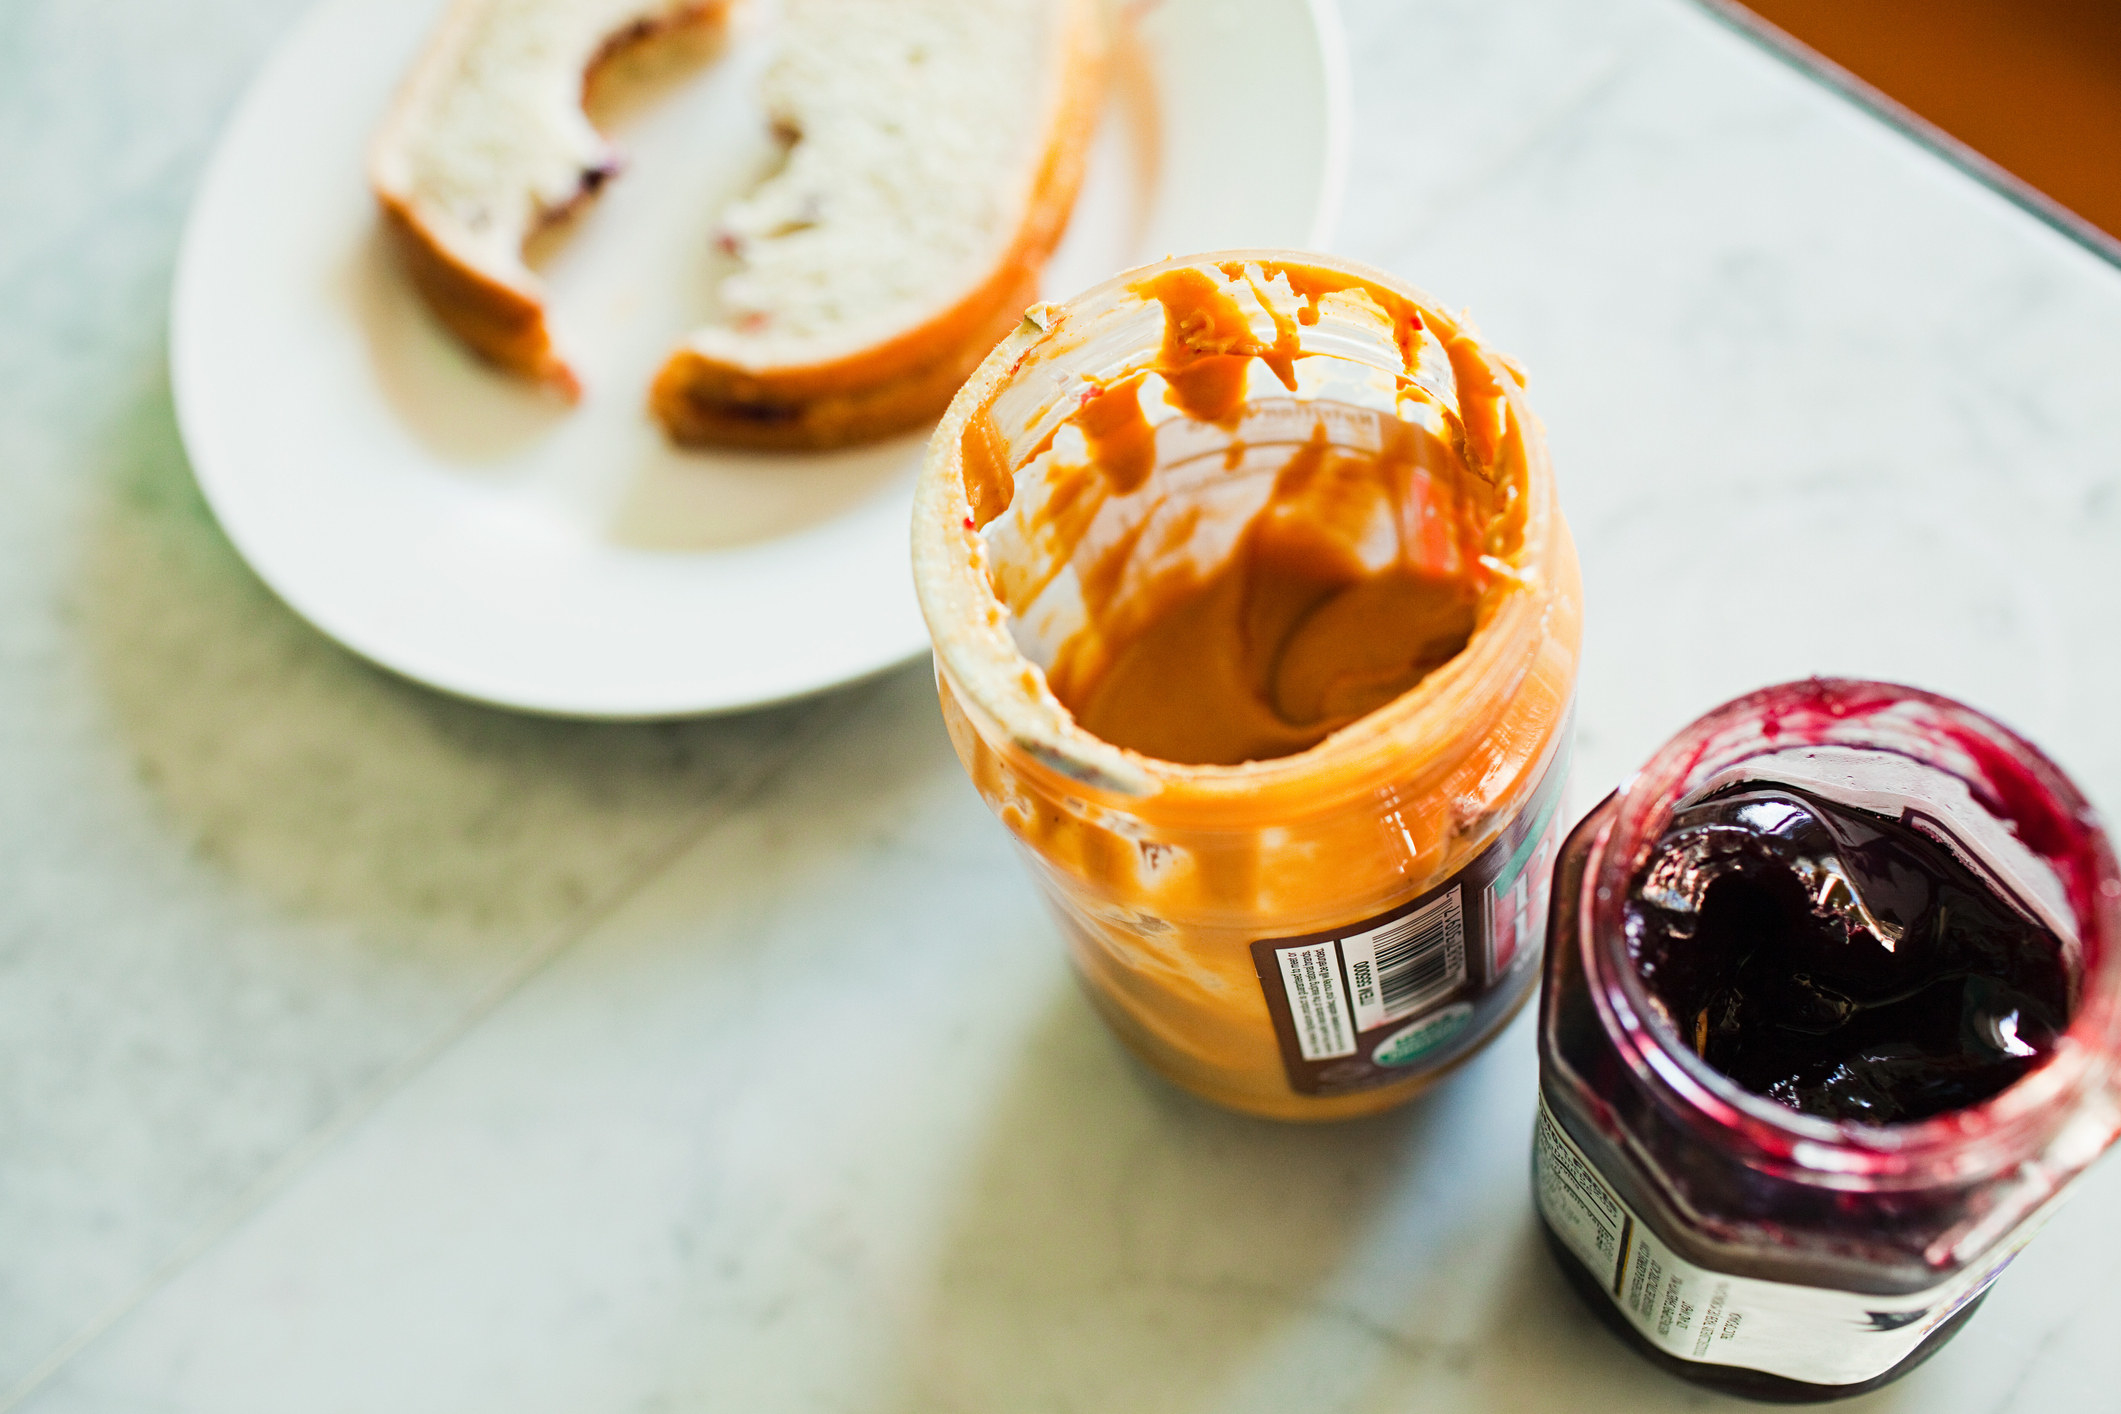 Peanut butter and jelly jars.